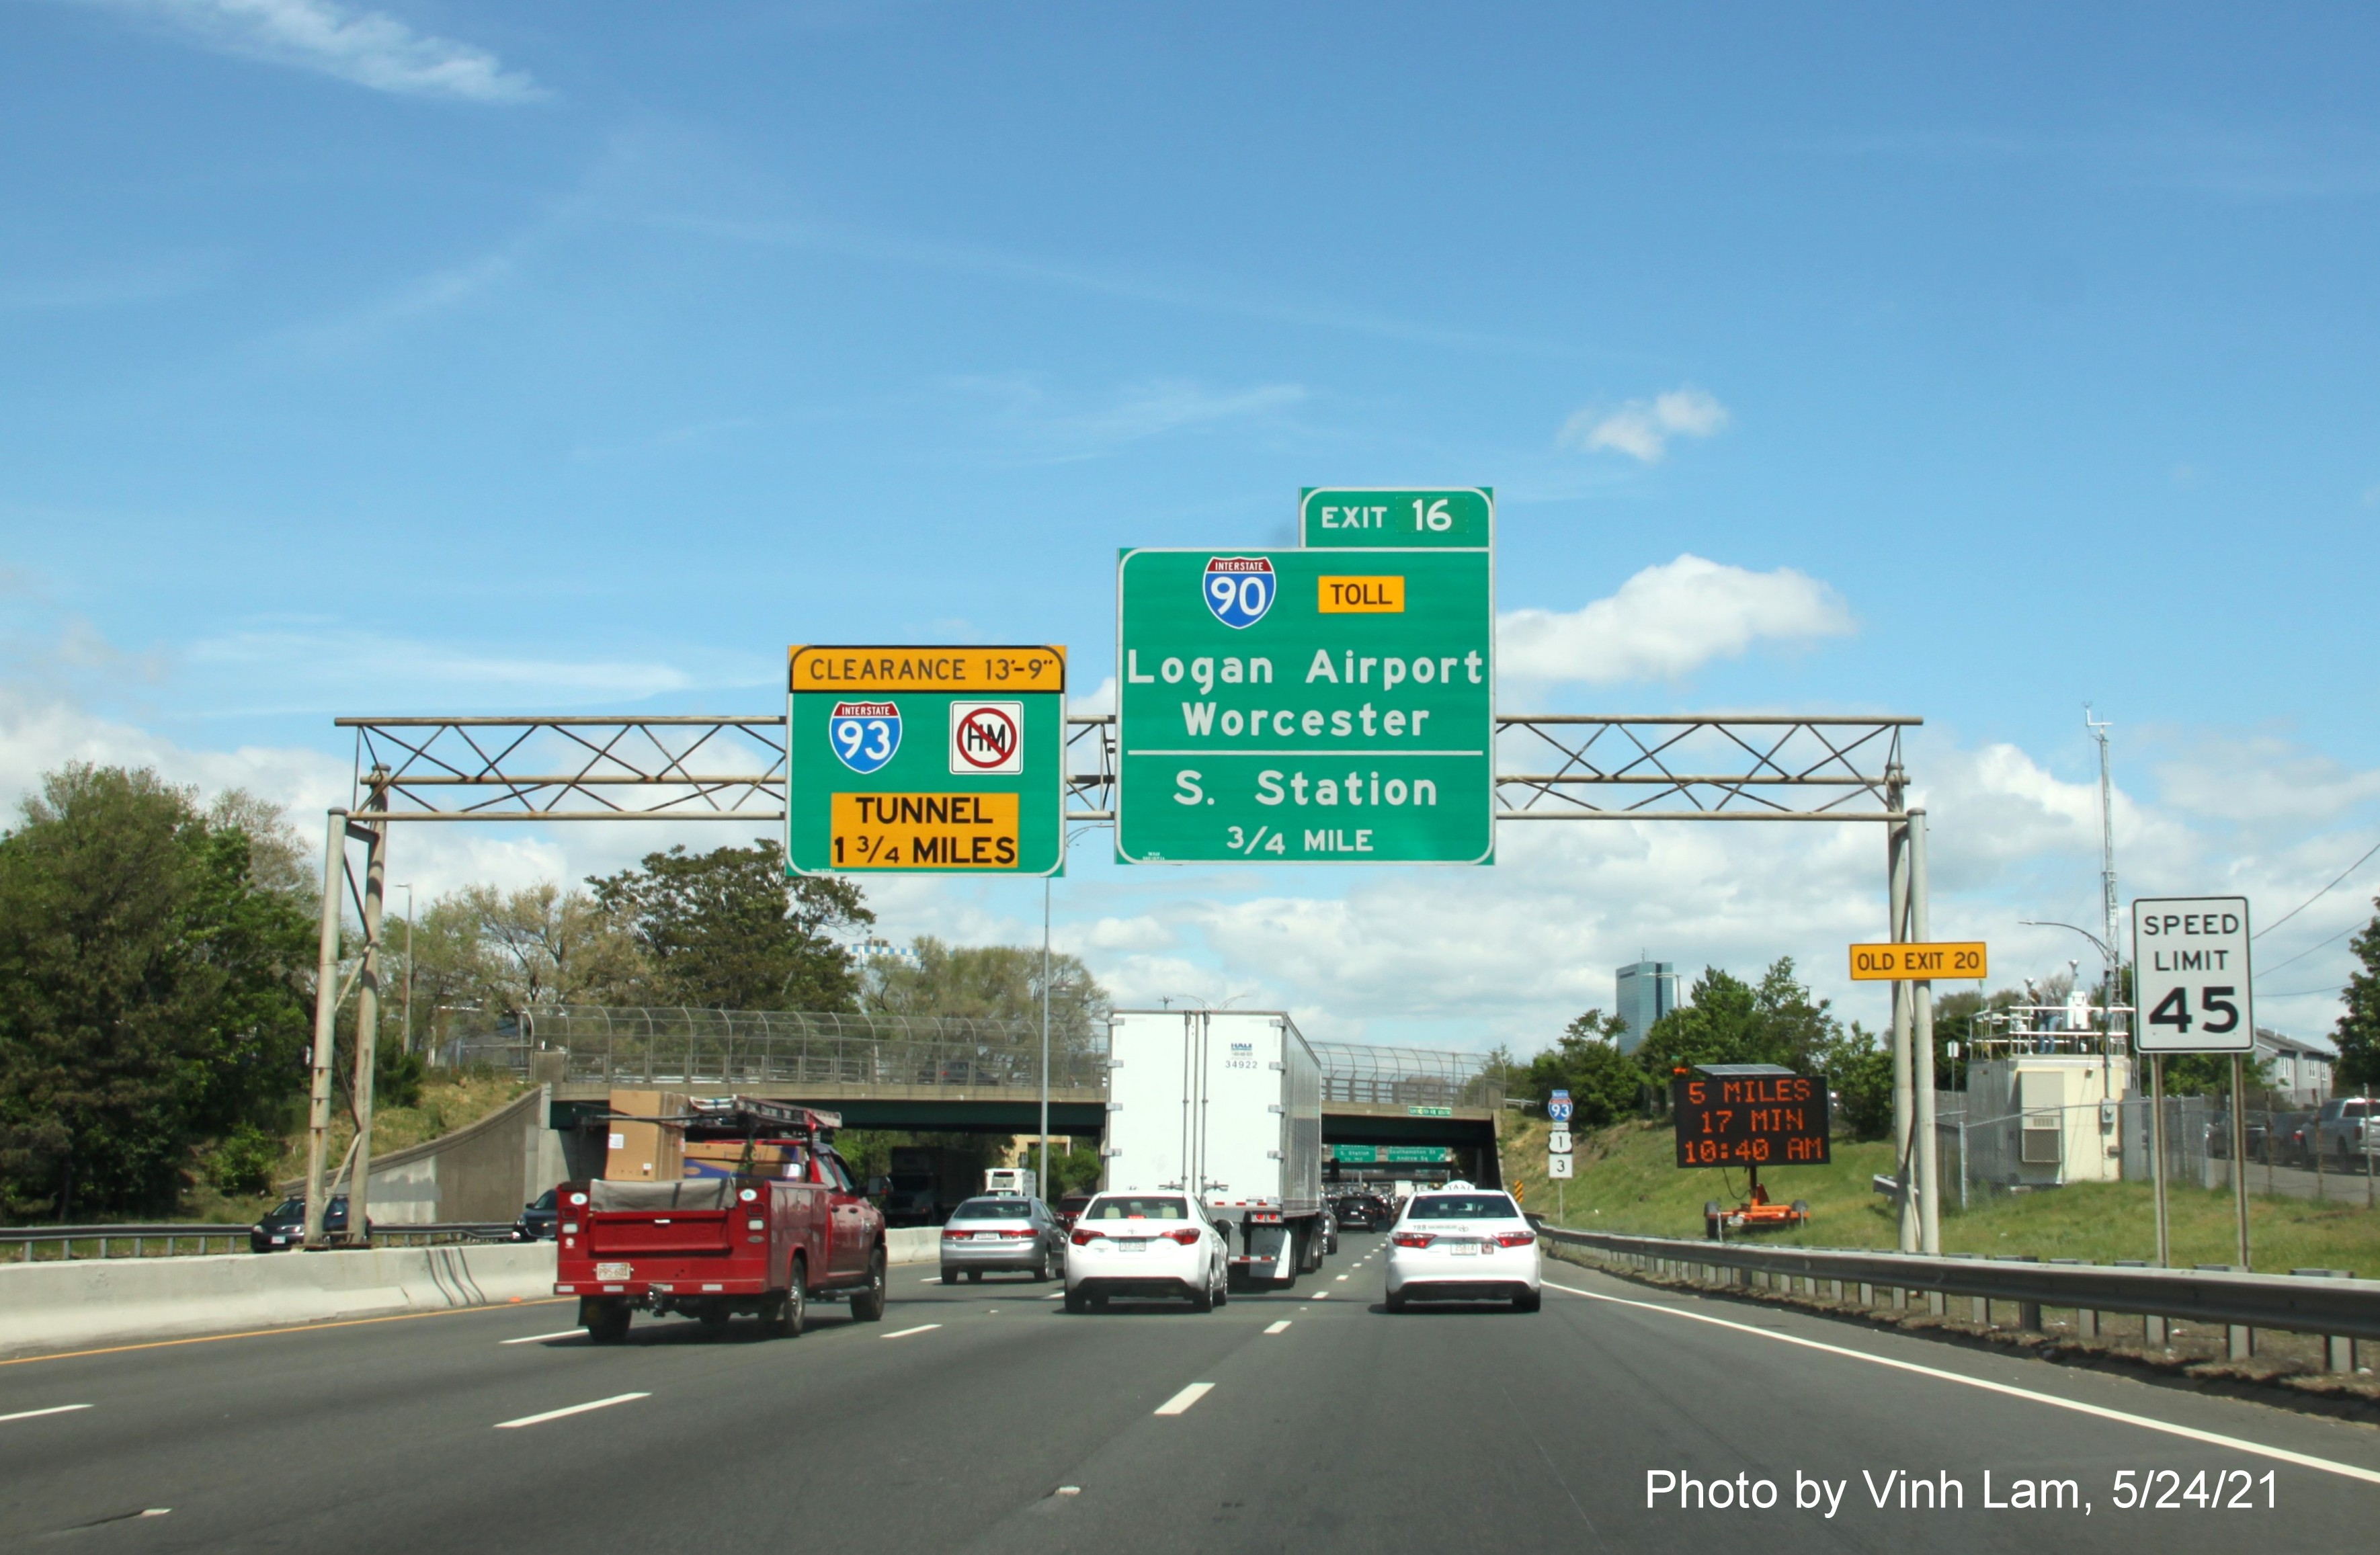 Image of 3/4 mile advance sign for I-90/South Station exit with new milepost based exit number and yellow Old Exit 20 advisory sign on right support on I-93 North in Dorchester, by Vinh Lam, May 2021